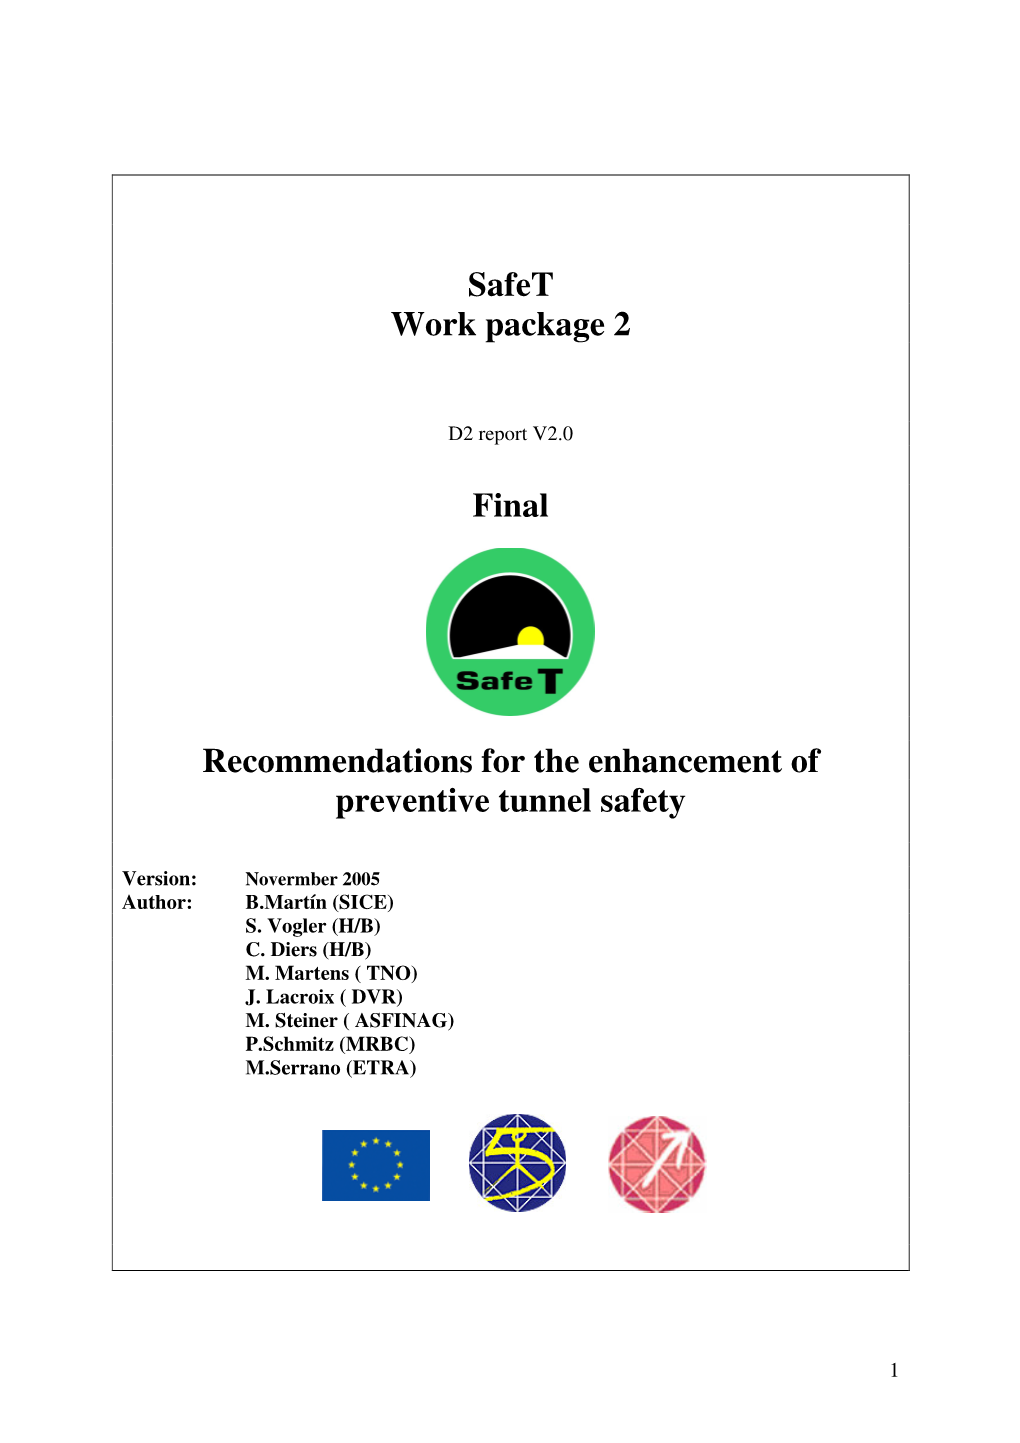 Safet Work Package 2 Final Recommendations for the Enhancement of Preventive Tunnel Safety